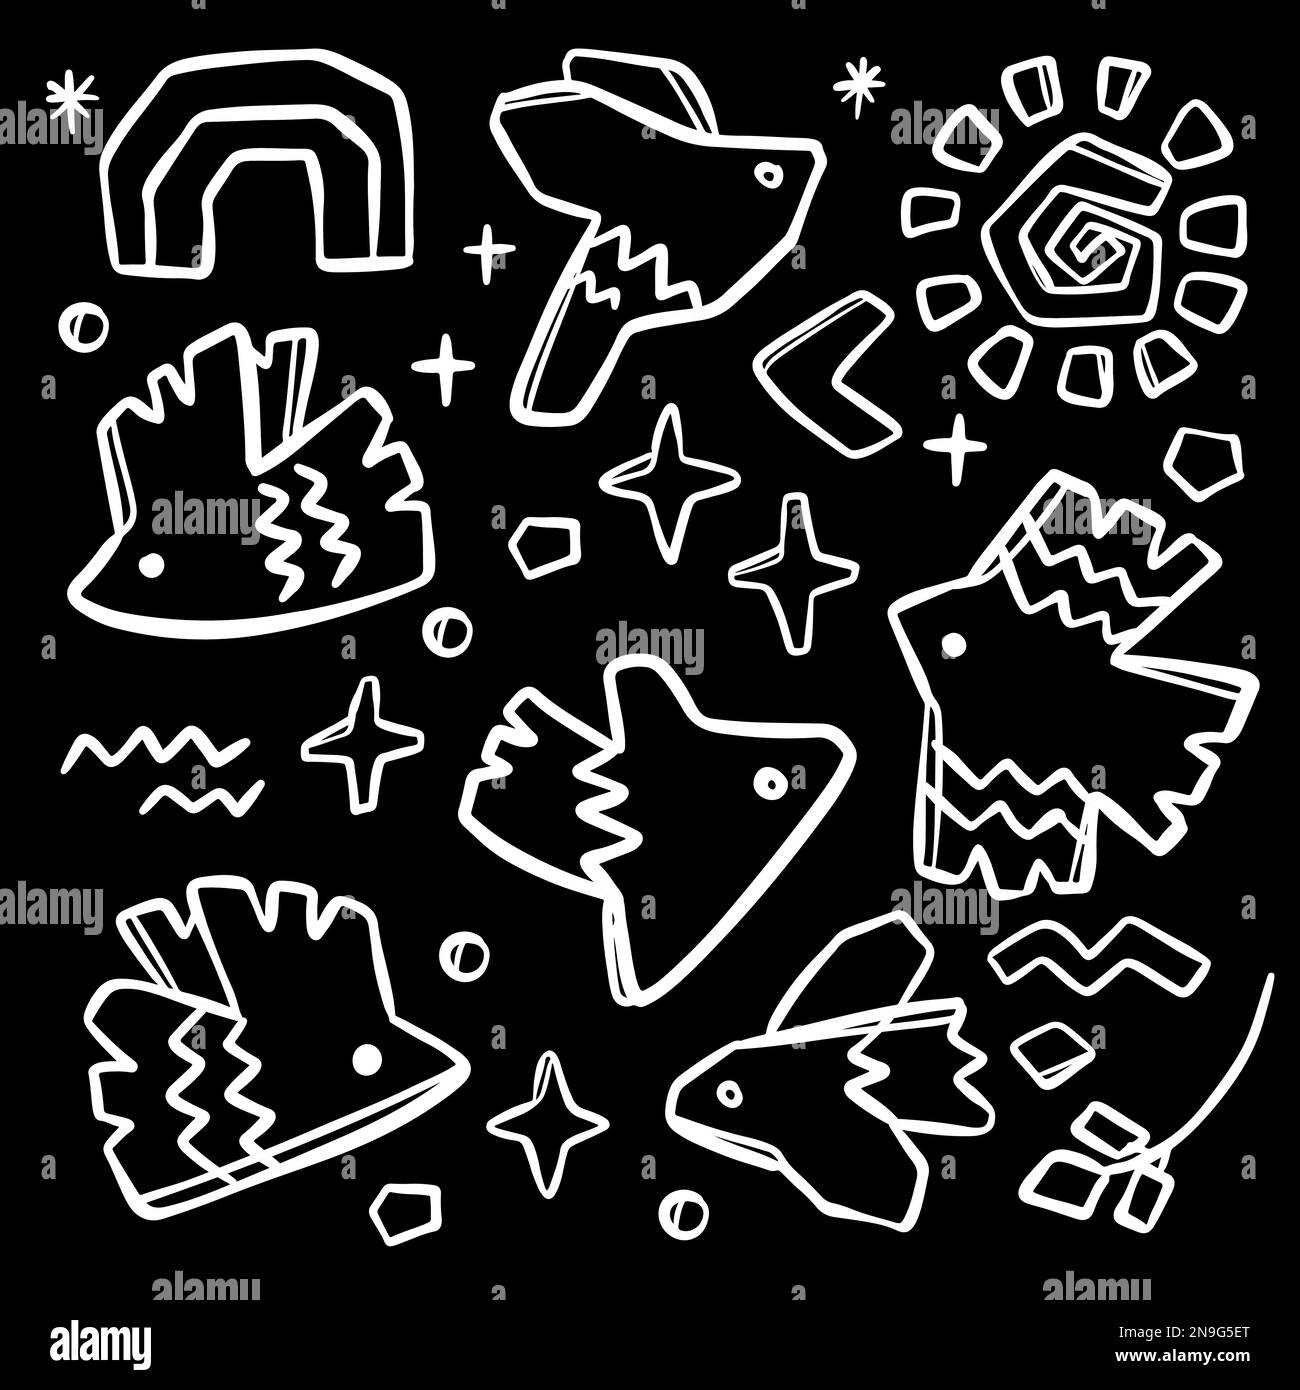 ABSTRACT FIGURES Contemporary Folk Doodle Monochrome Sketch Modern African Hand Drawn Flat Bird Shapes Fabric Print Background Matisse Style Creative Stock Vector